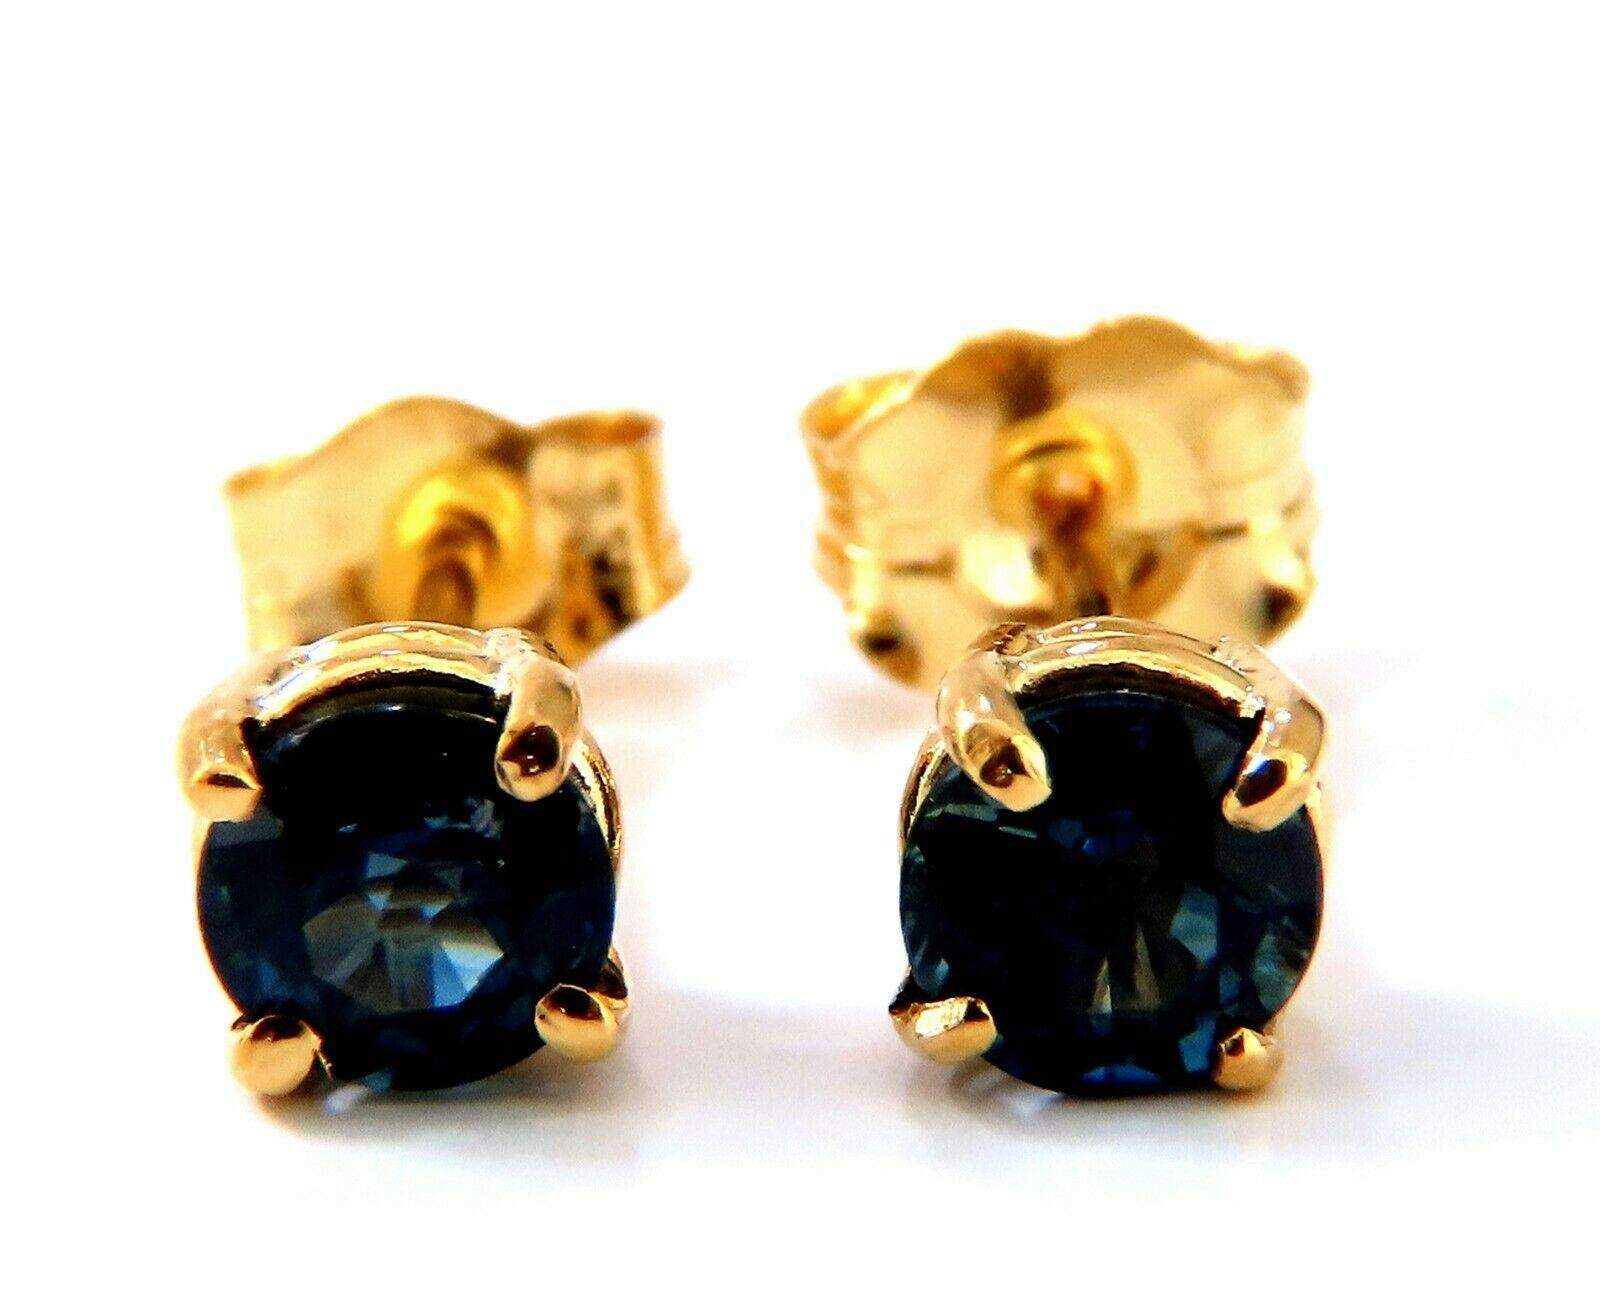 Classic stud earrings

1ct natural round cut sapphires.

Clean clarity and transparent.

4.6mm each.

Depth of earrings: 4mm

14kt Yellow gold 1 gram